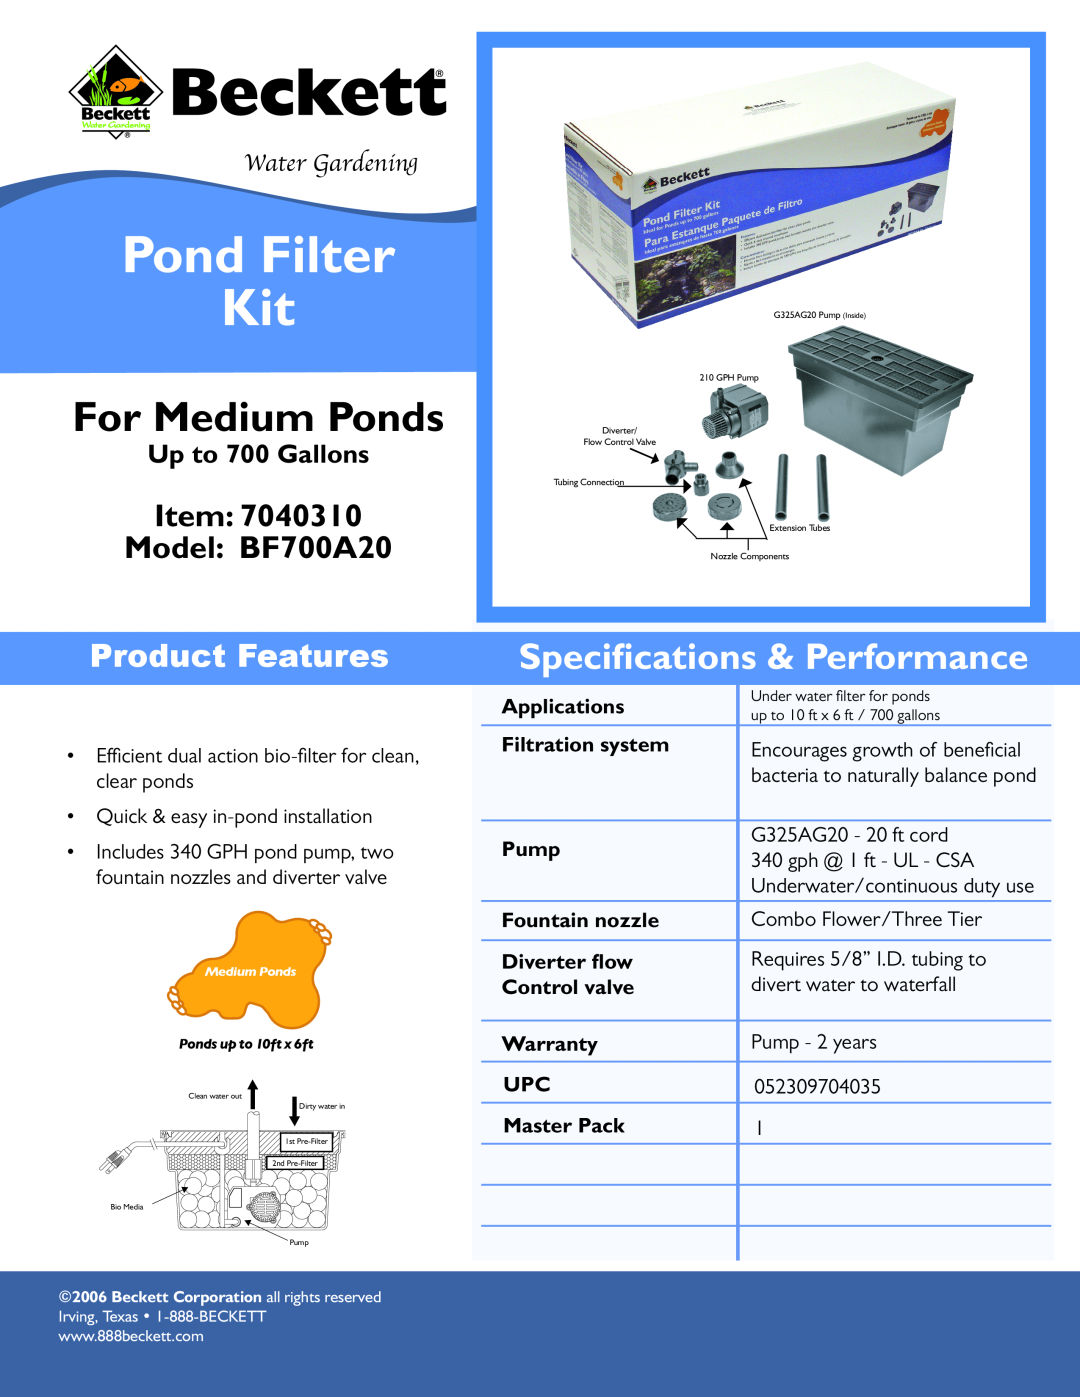 Beckett Water Gardening BF700A20 specifications Pond Filter Kit, For Medium Ponds, Speciﬁcations & Performance, Pump 